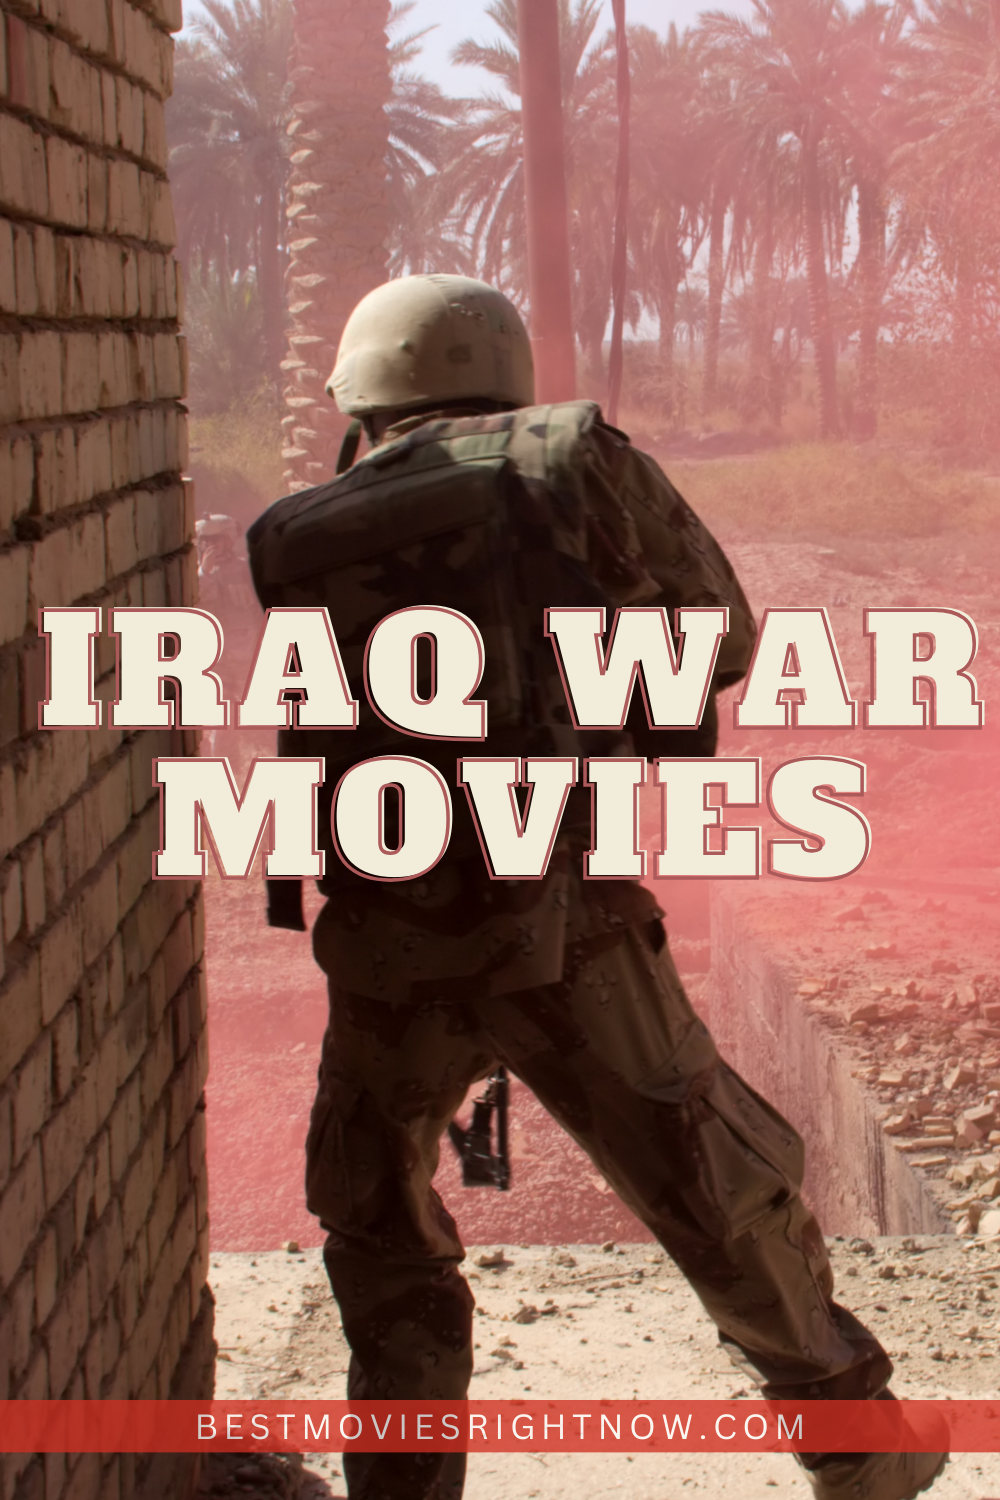 an image of soldier with text :"Iraq War Movies"